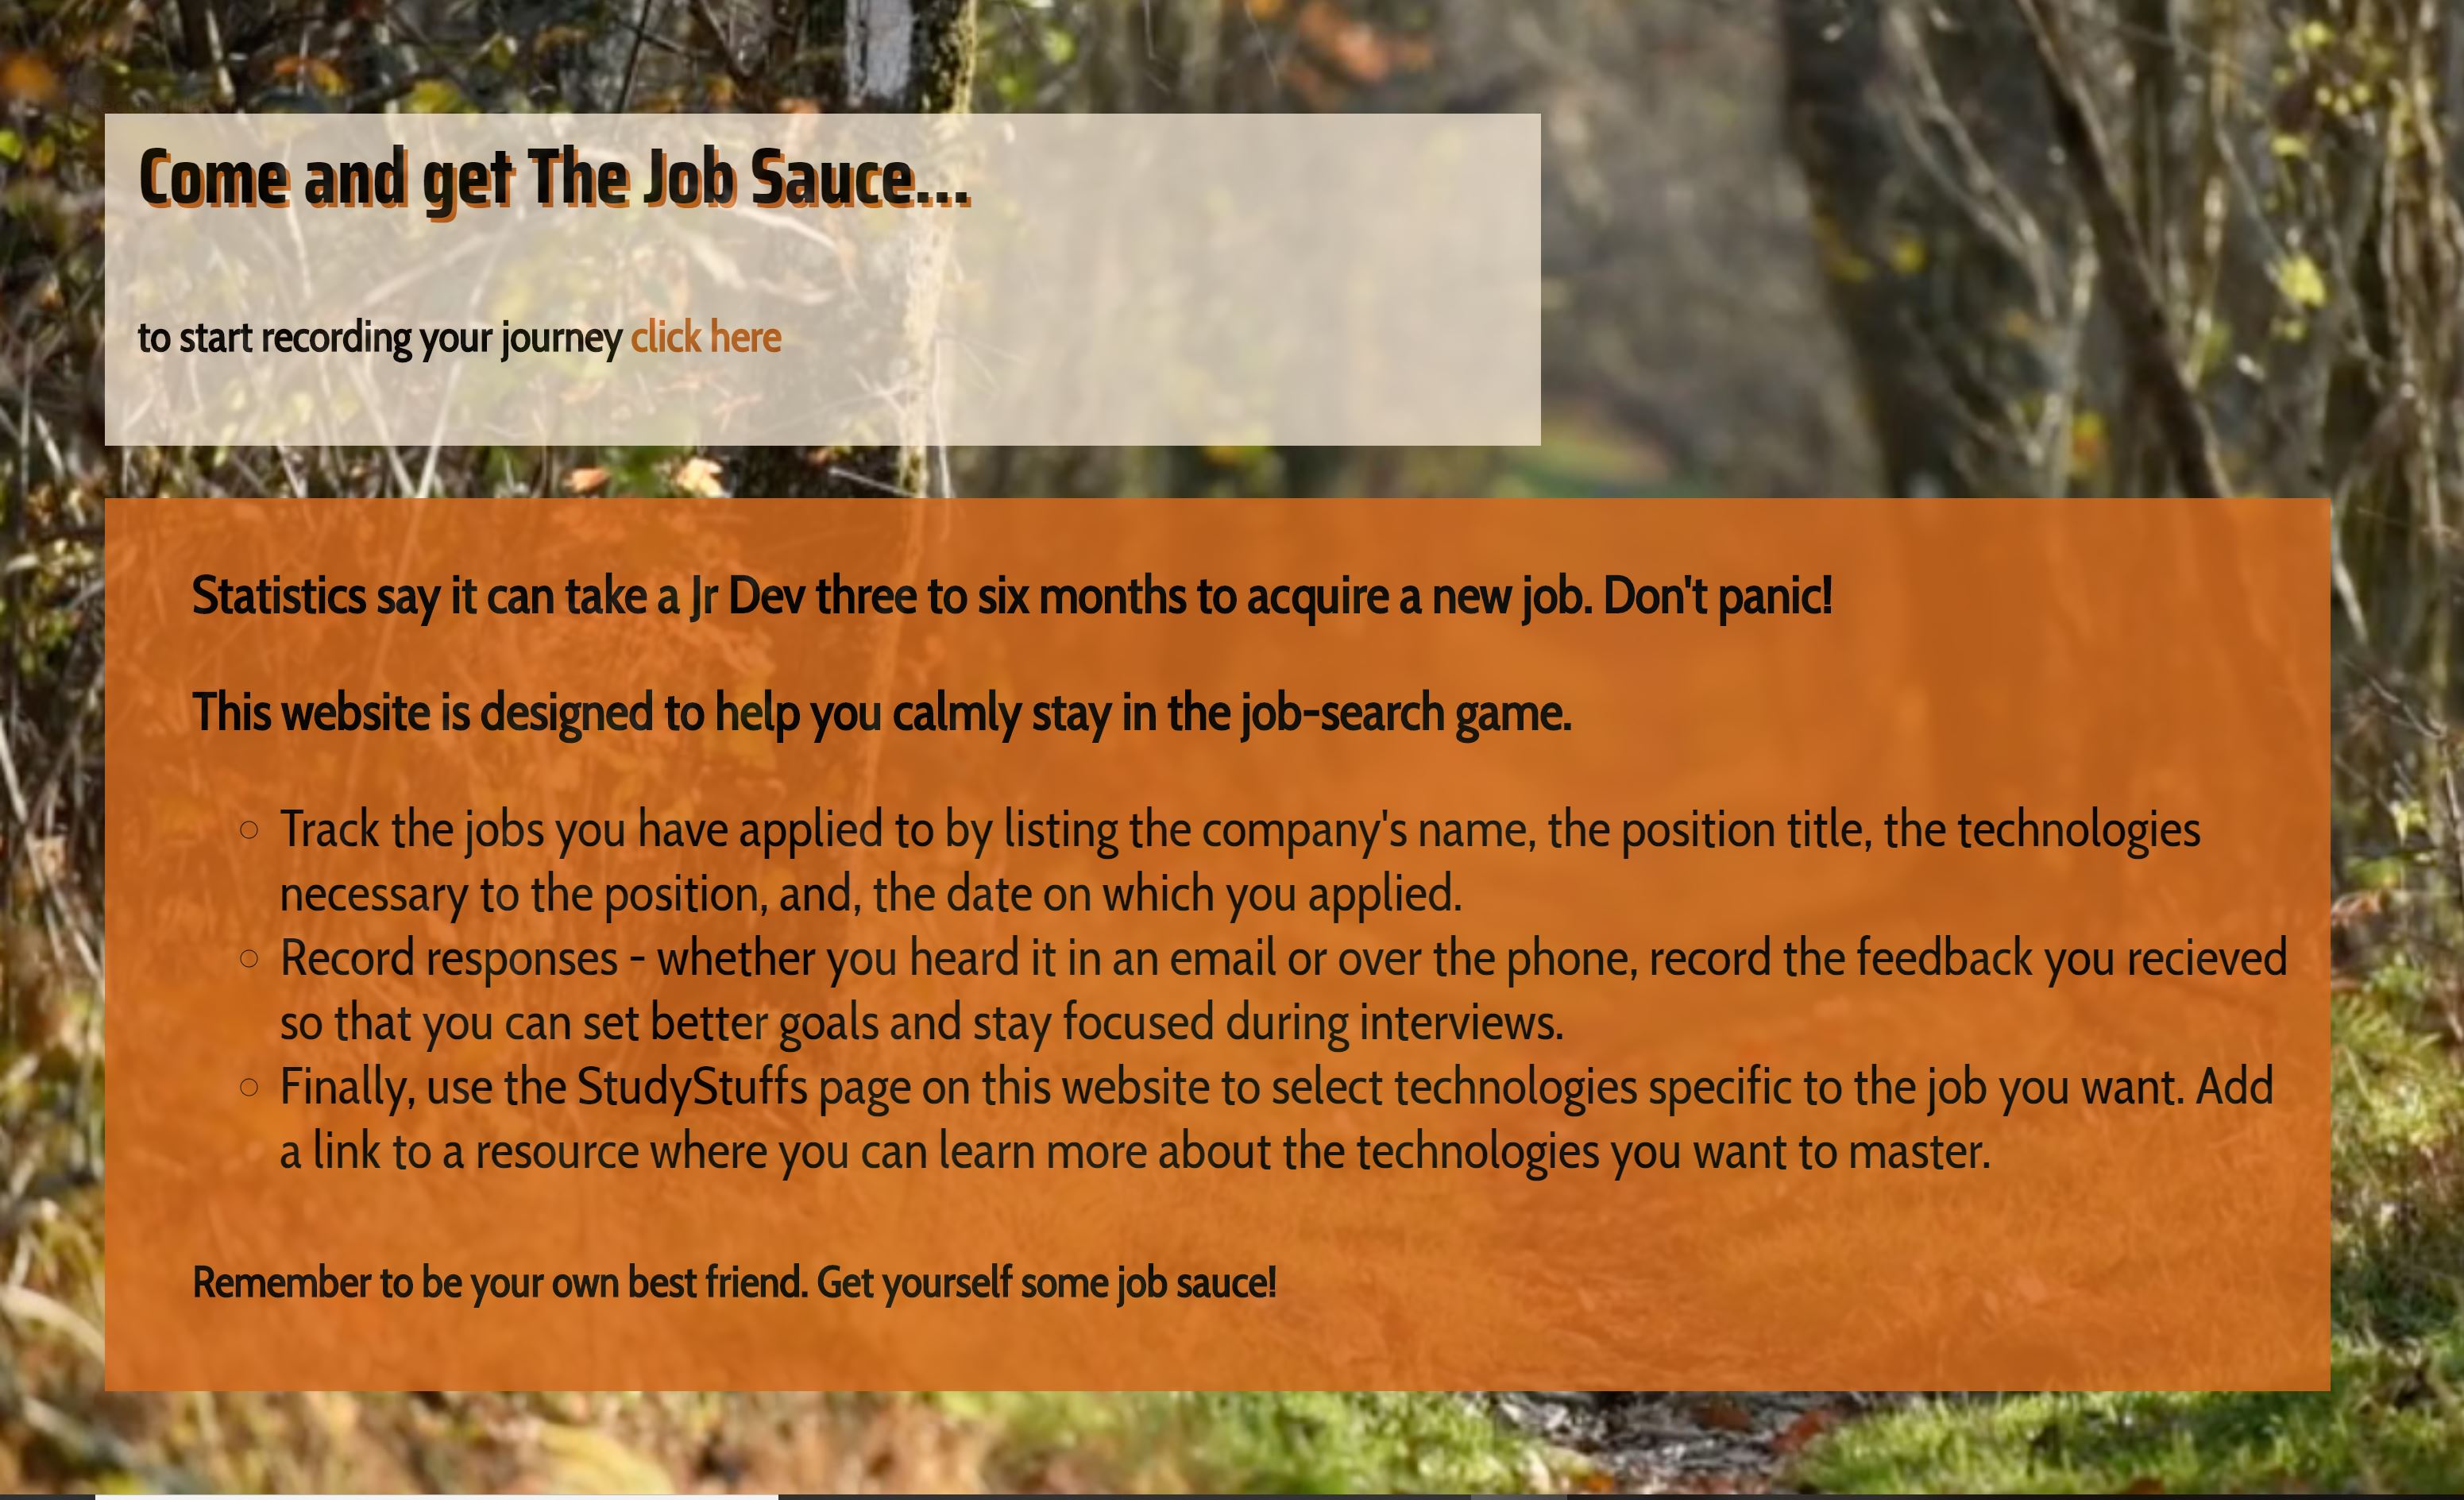 Get the Job Sauce was built in Python, HTML and CSS using the Django framework; it has a SQLite database.